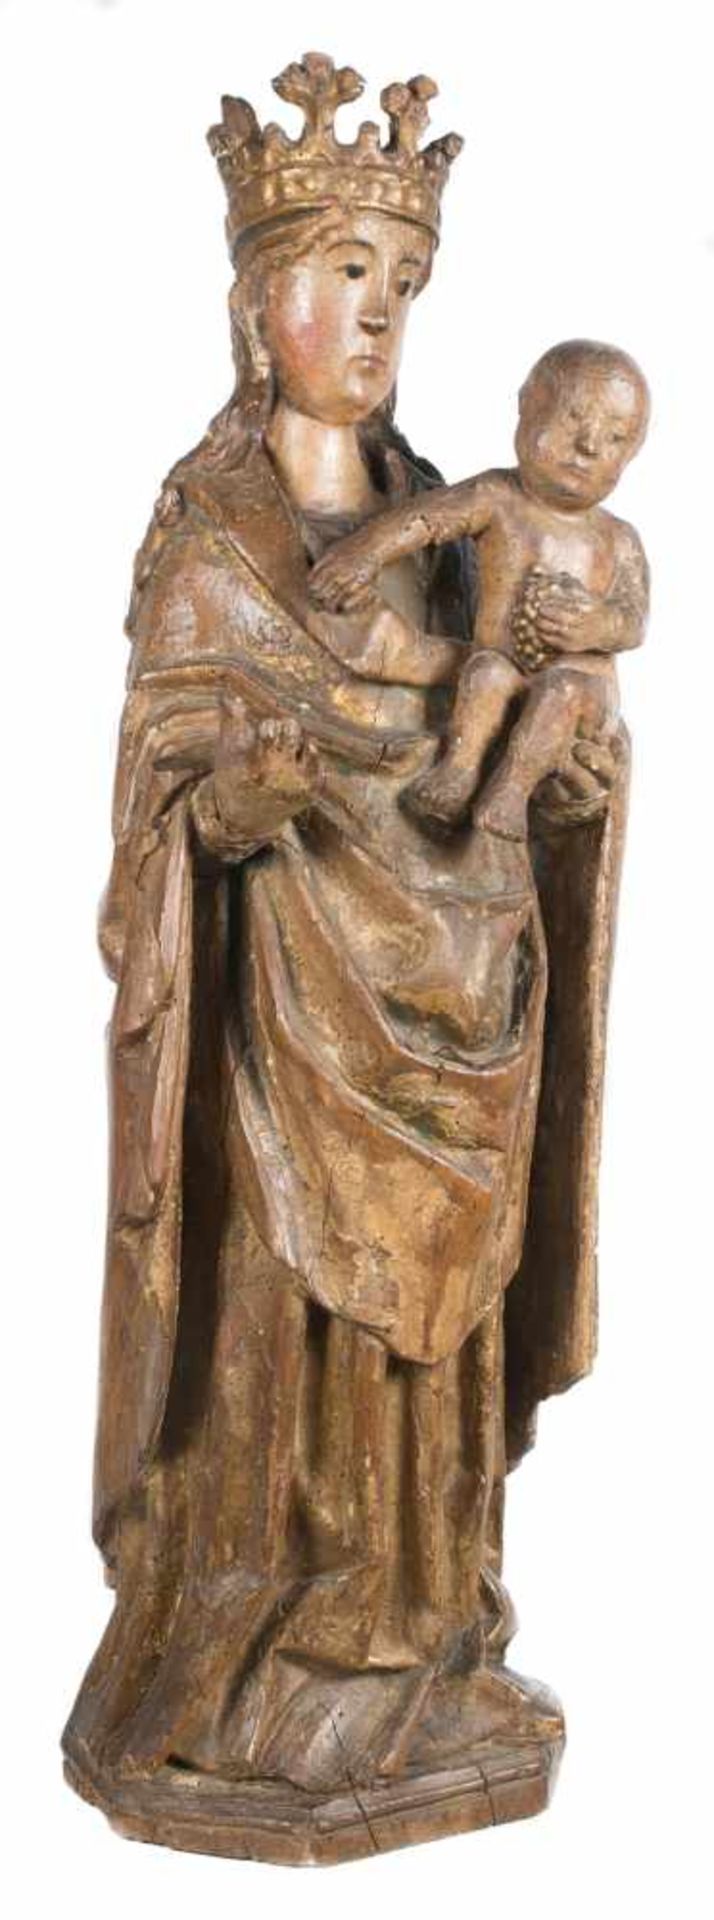 “Madonna and Child”. Carved and polychromed wooden sculpture. Spanish School. Gothic. 14th – 15th